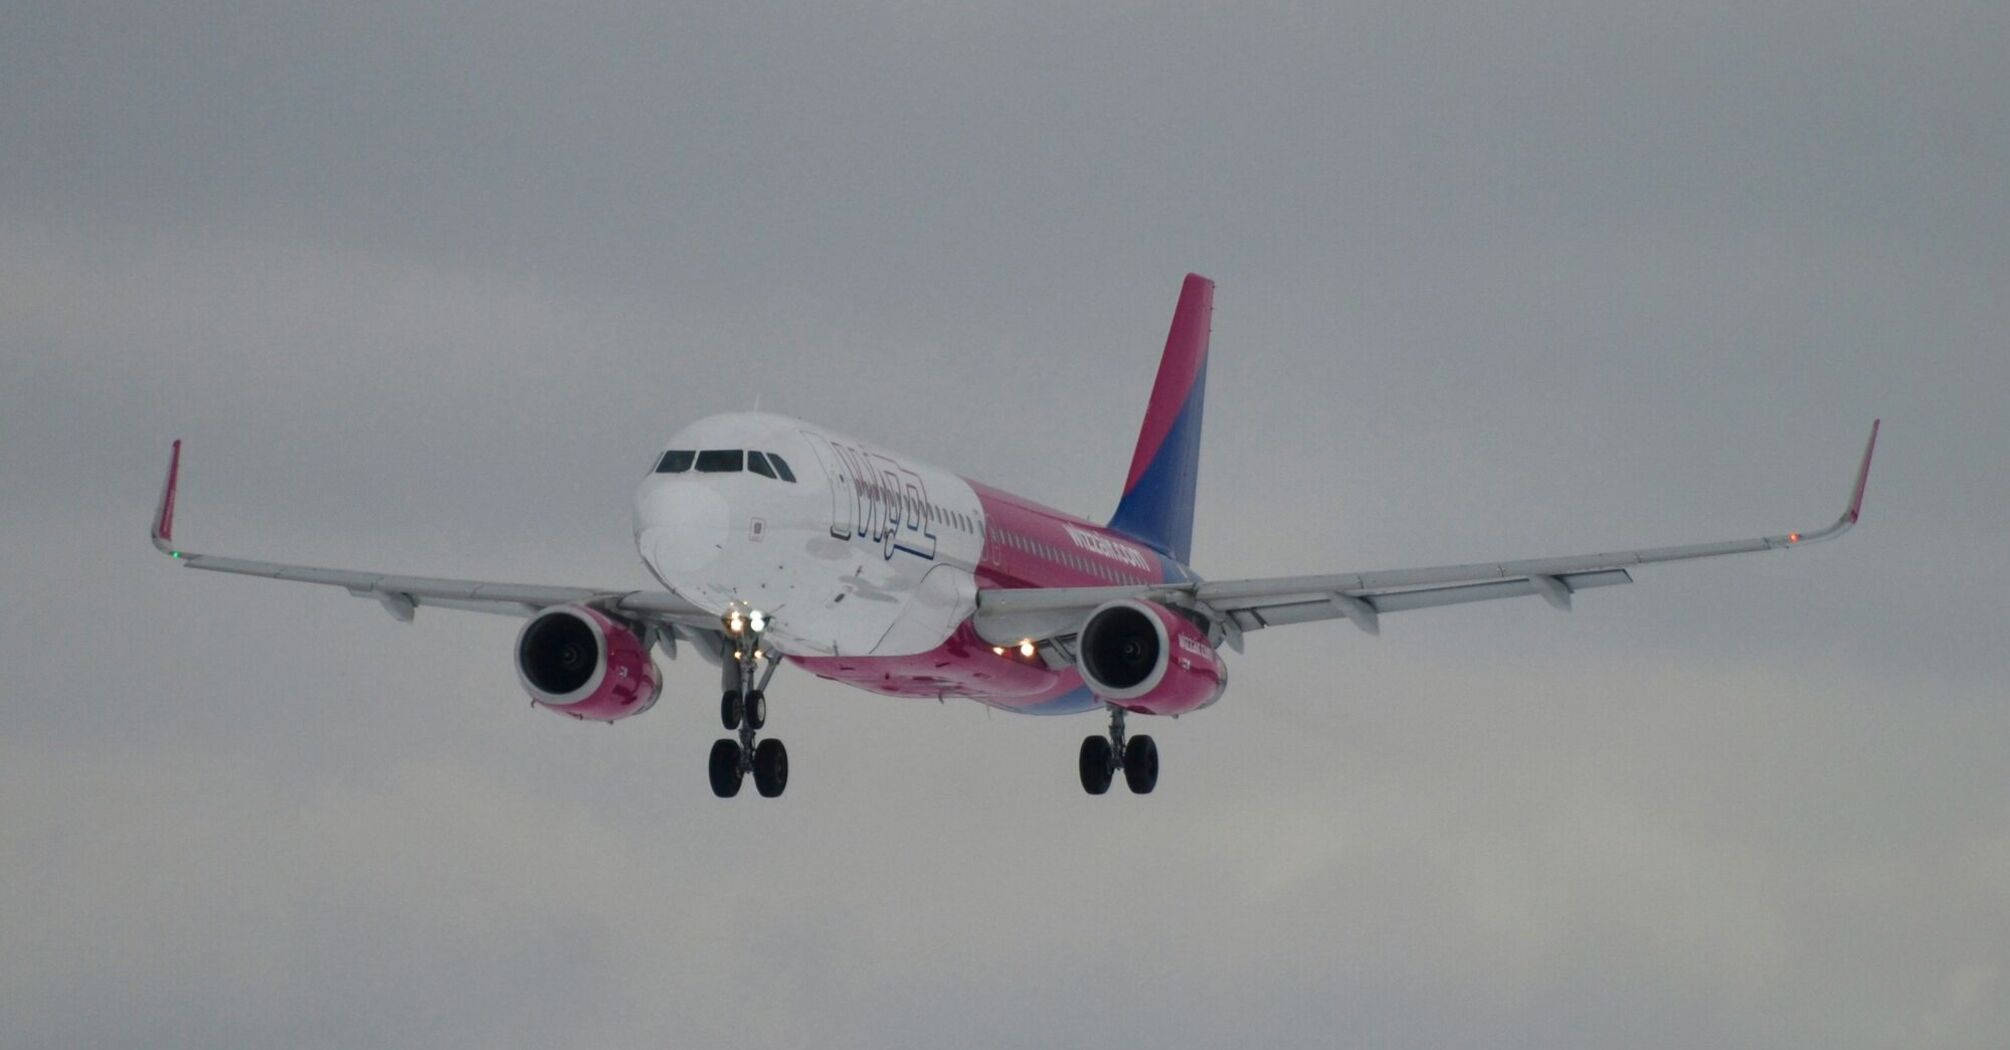 A large Wizzair jetliner flying through a cloudy sky